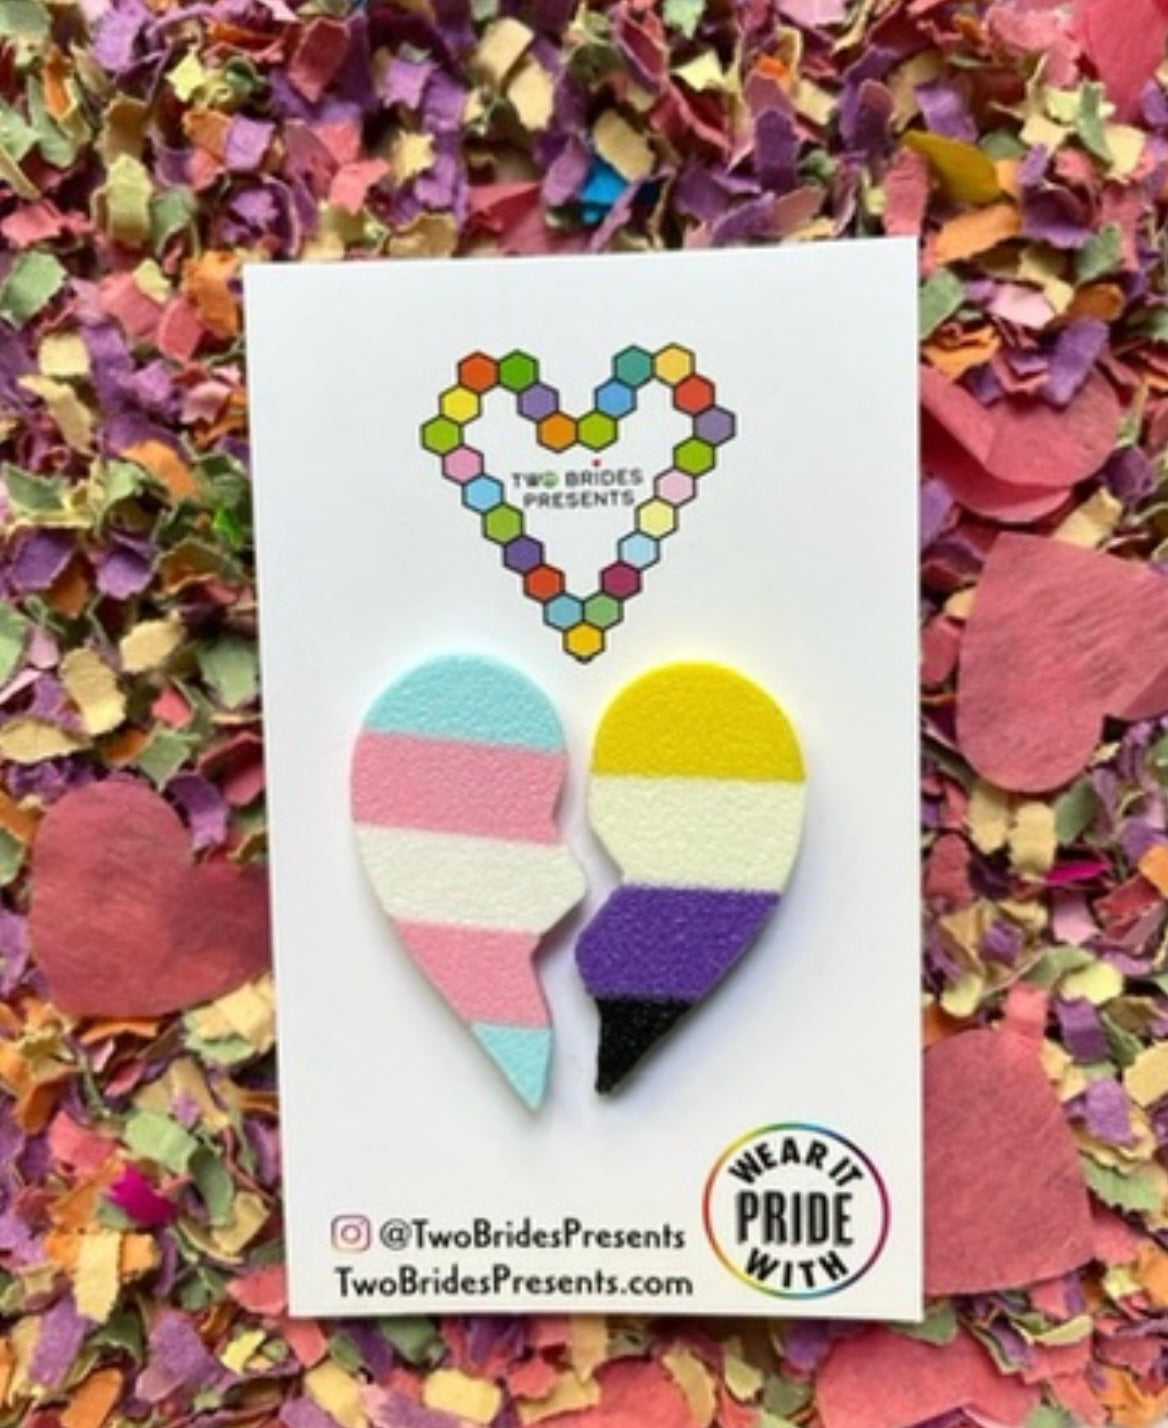 BFF 3D Trans and Non-Binary Heart Pins